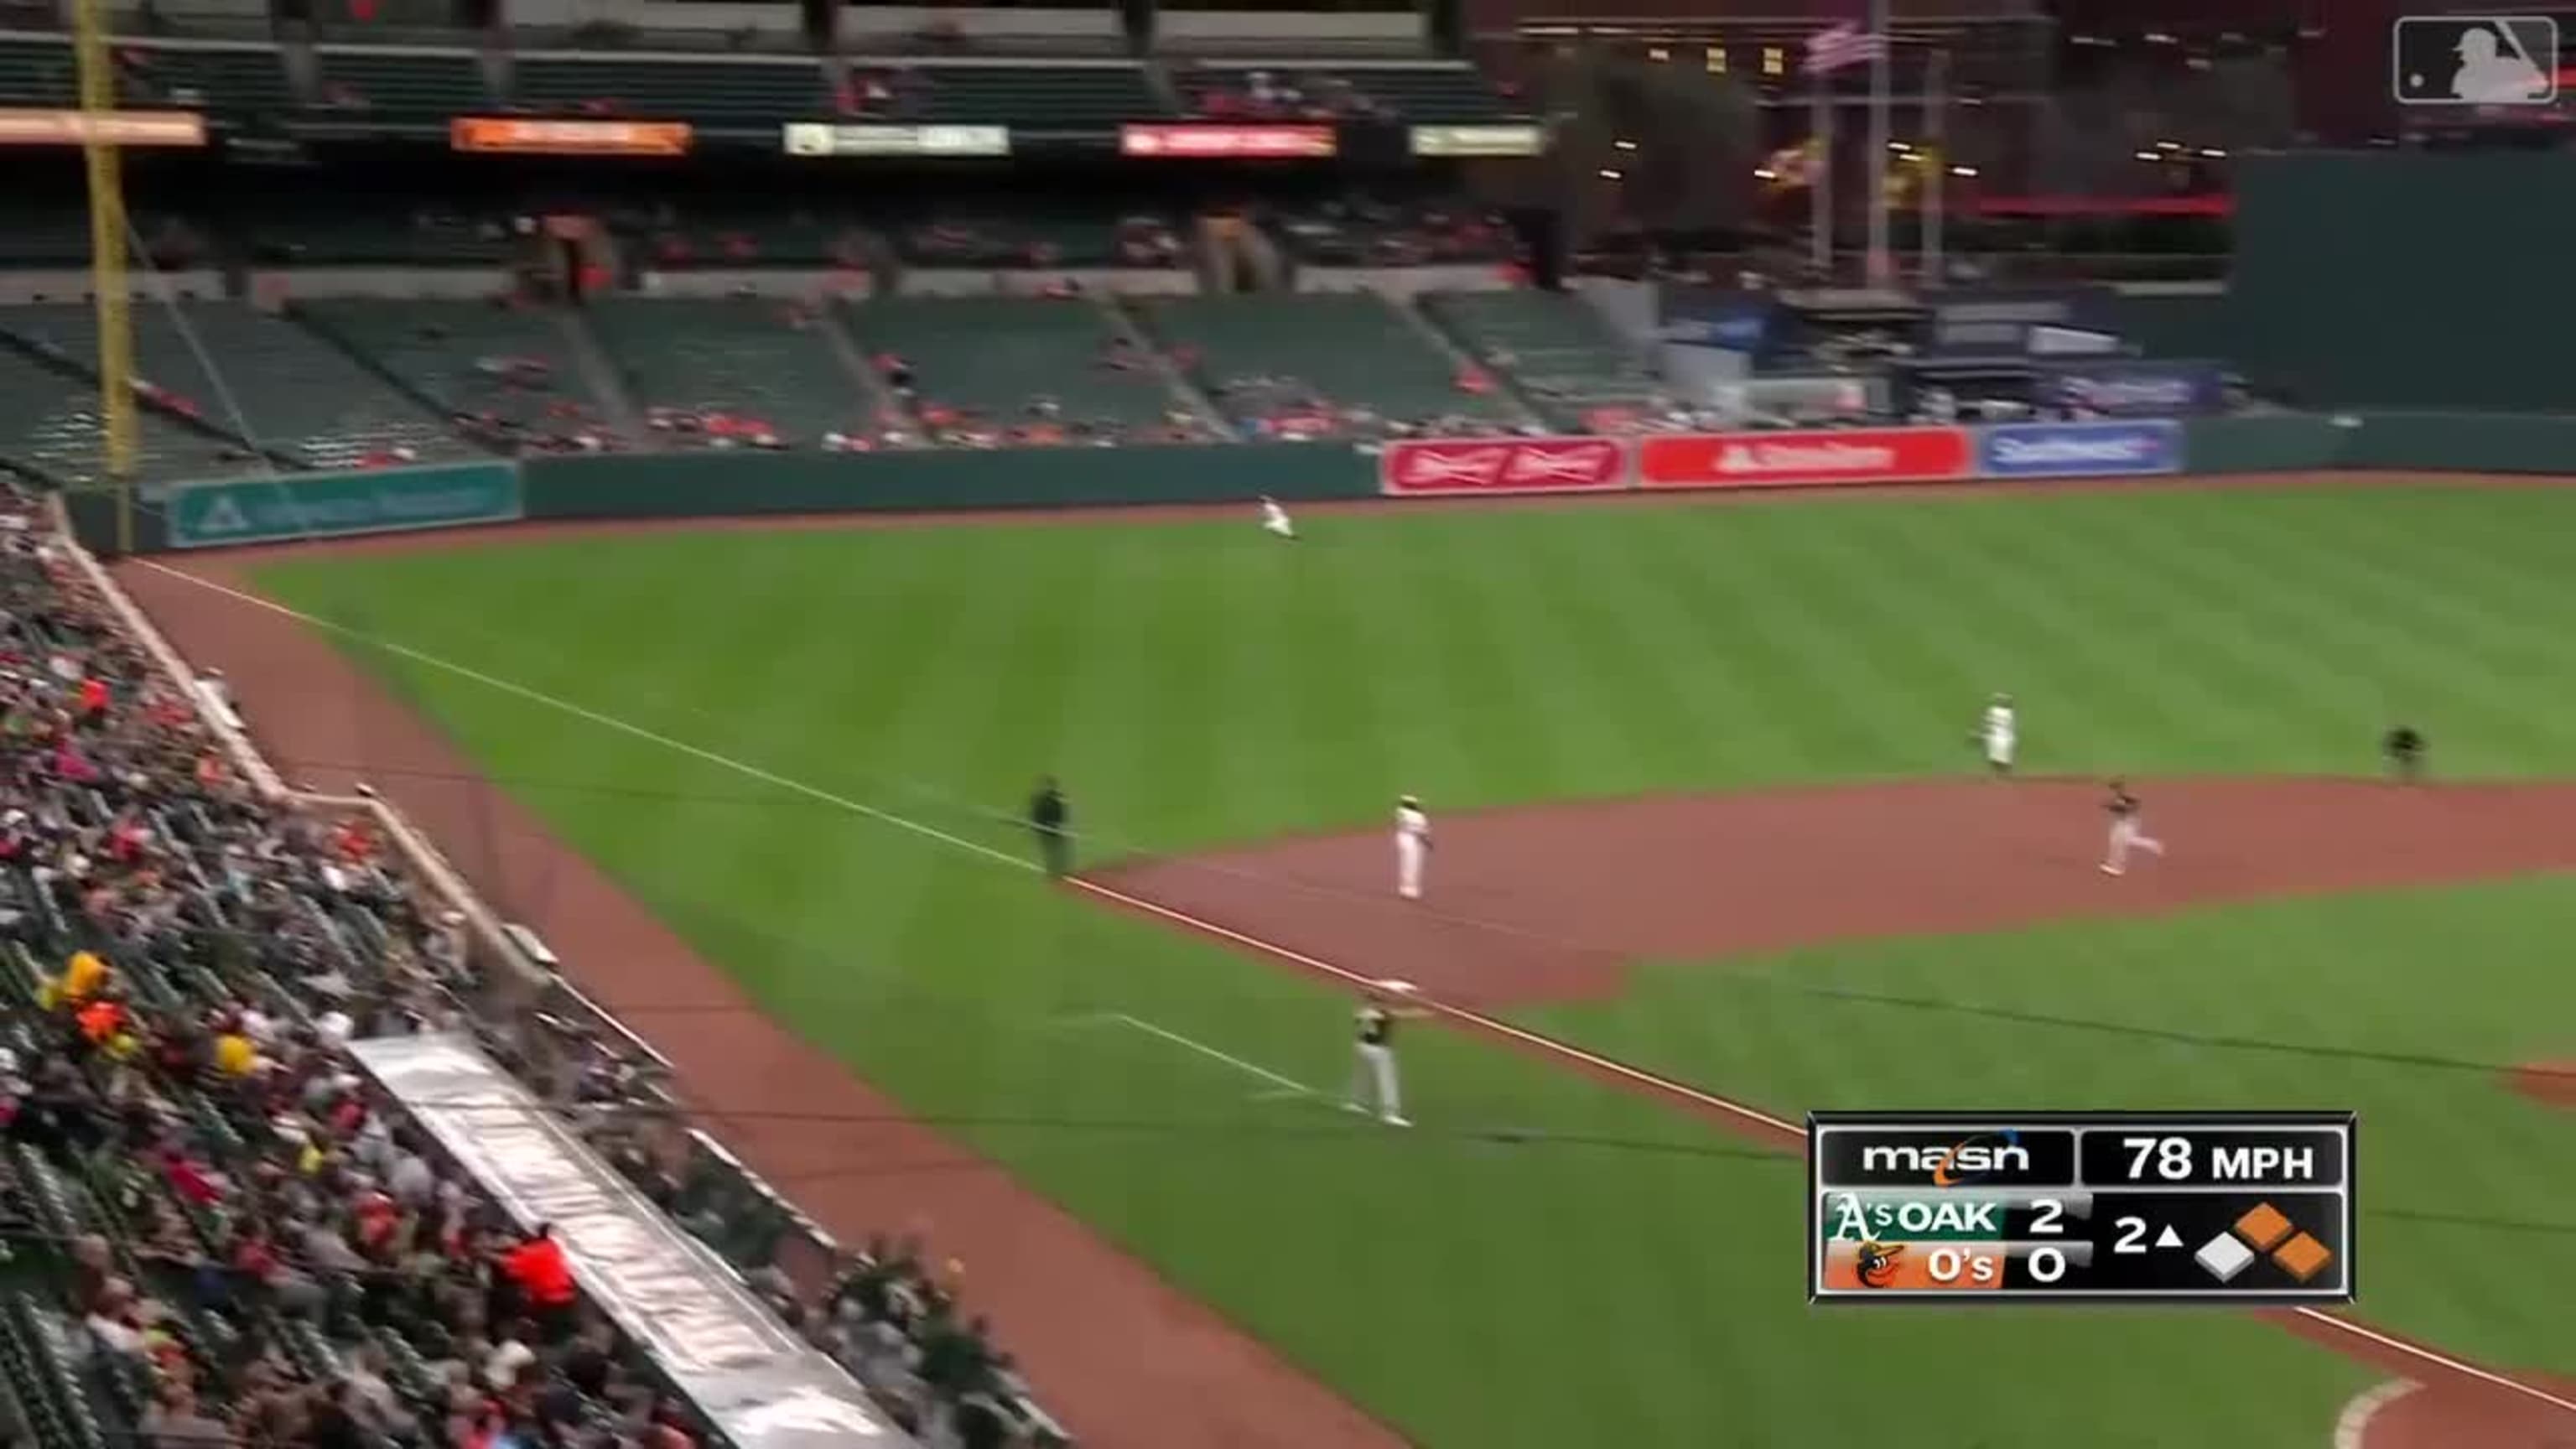 camden yards new dimensions